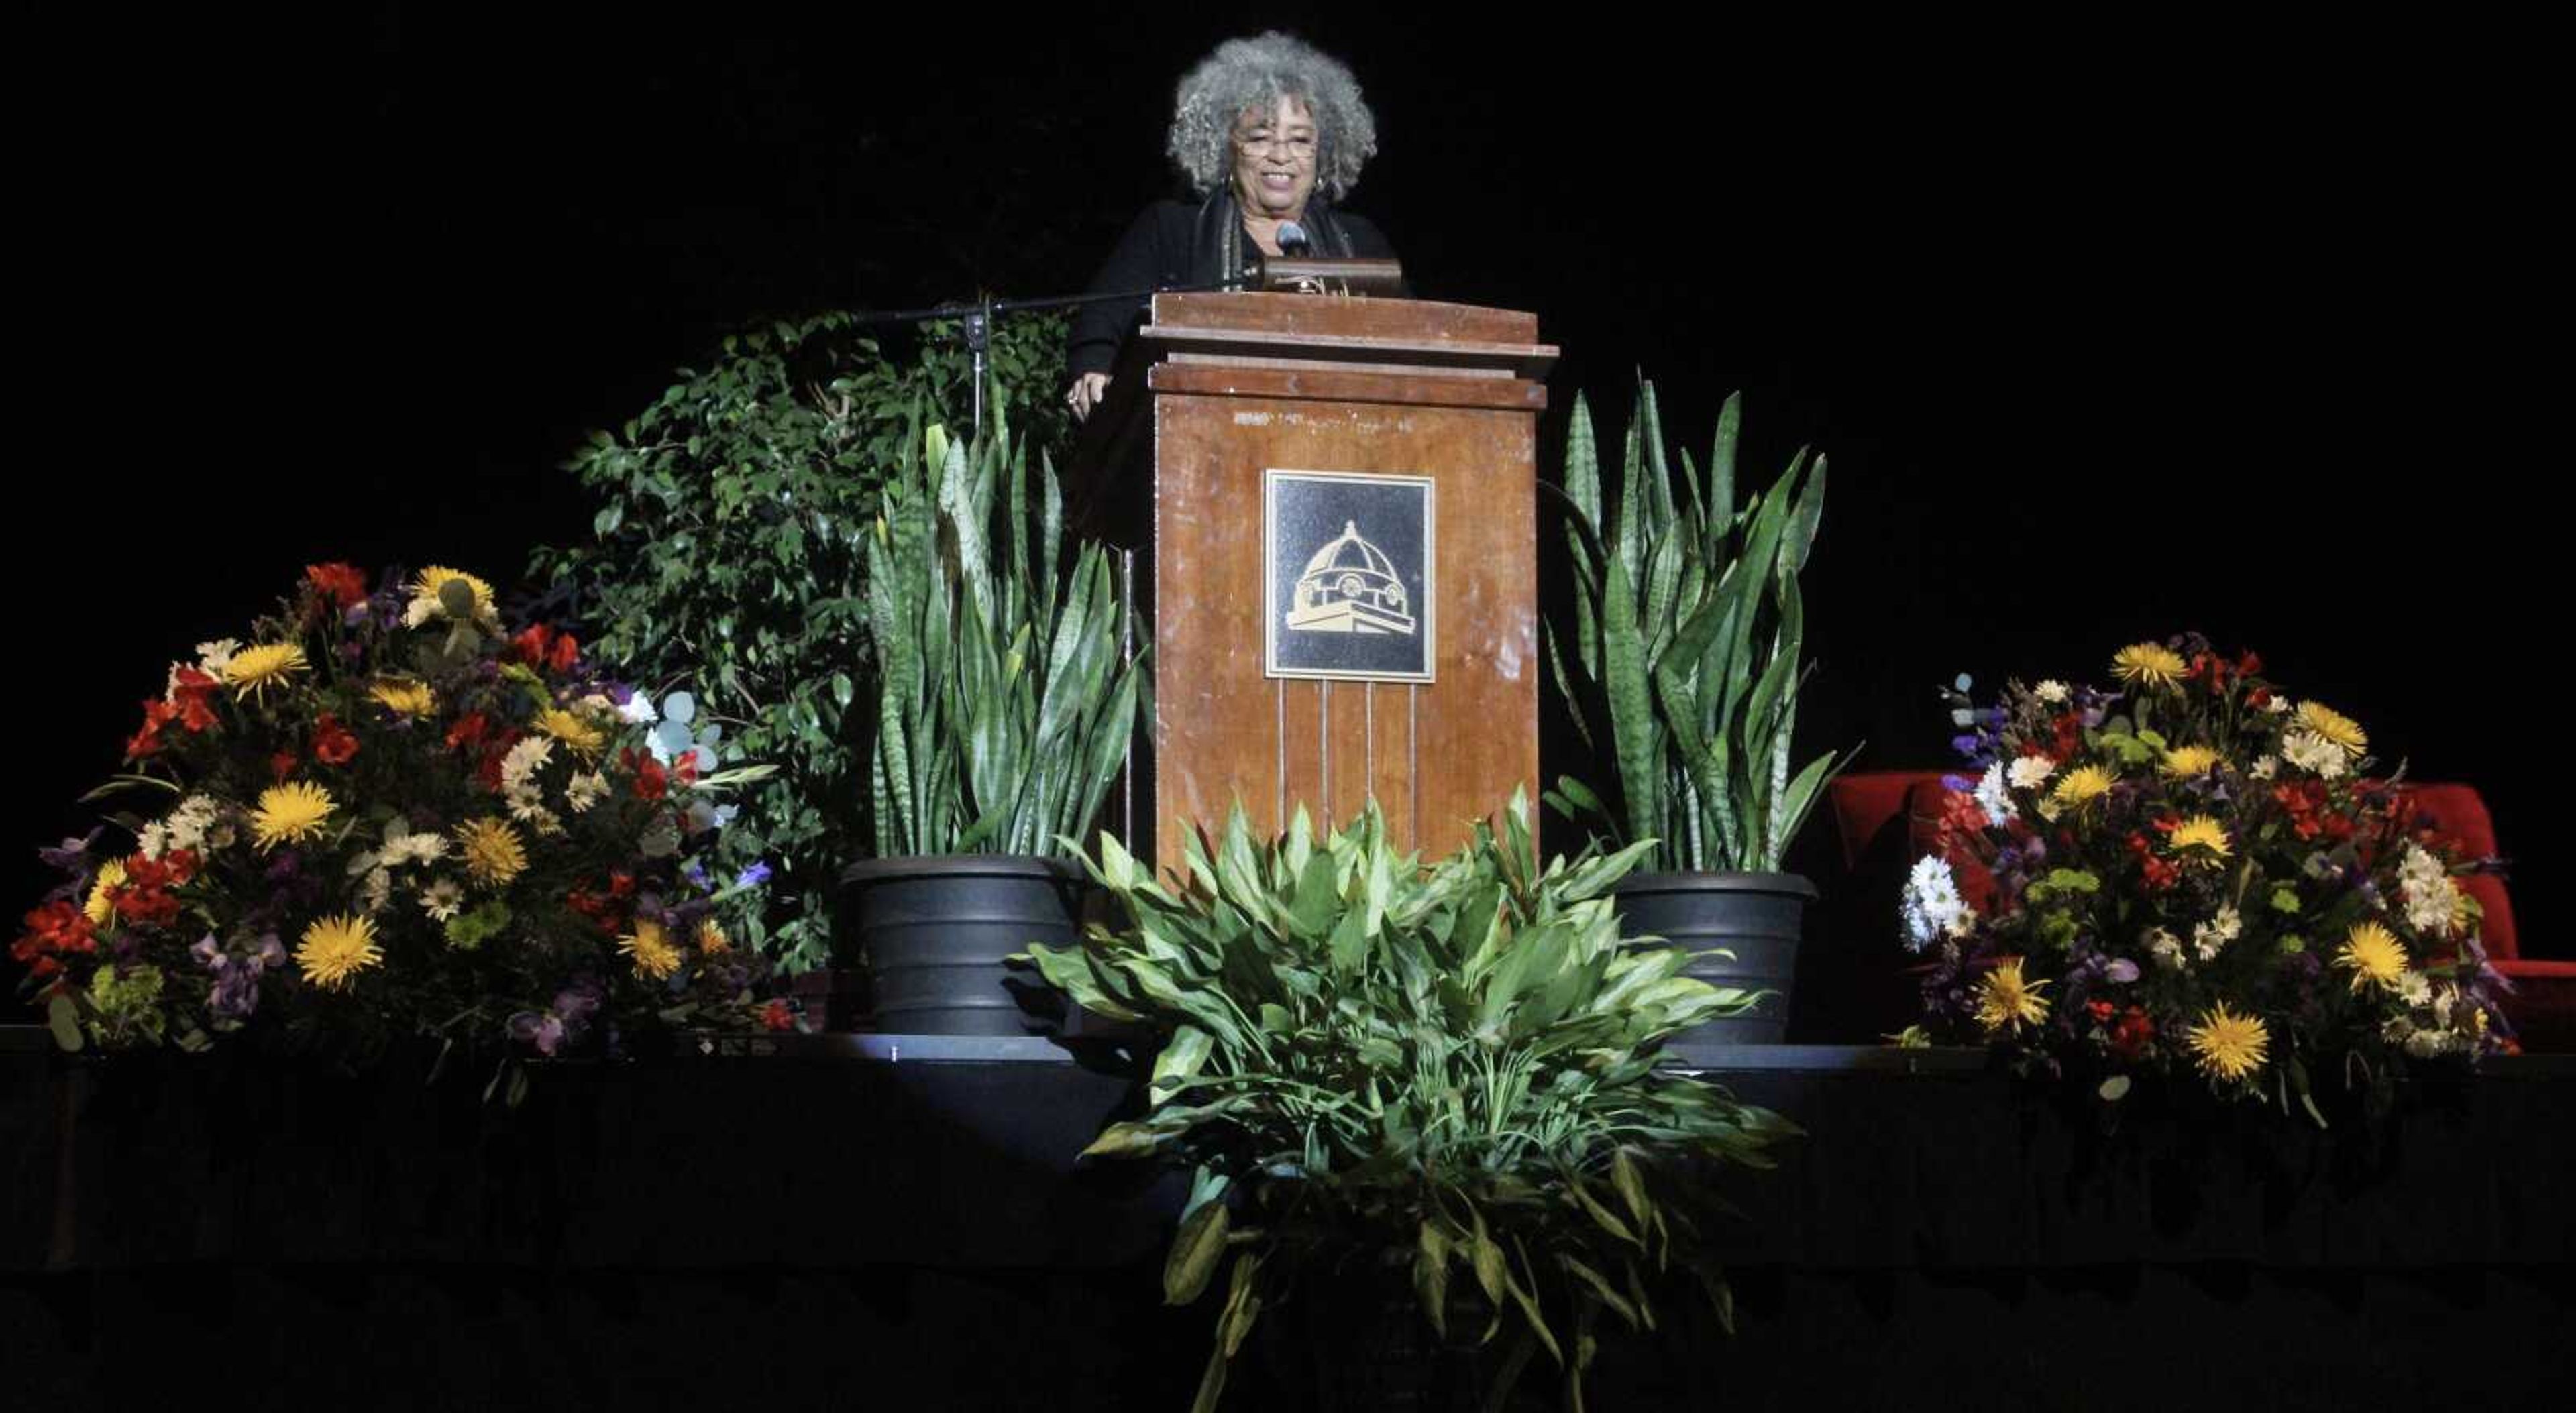 Angela Davis discusses racism, sexism, prison reform among other social issues; urges audience to “think globally” at MLK Celebration Dinner